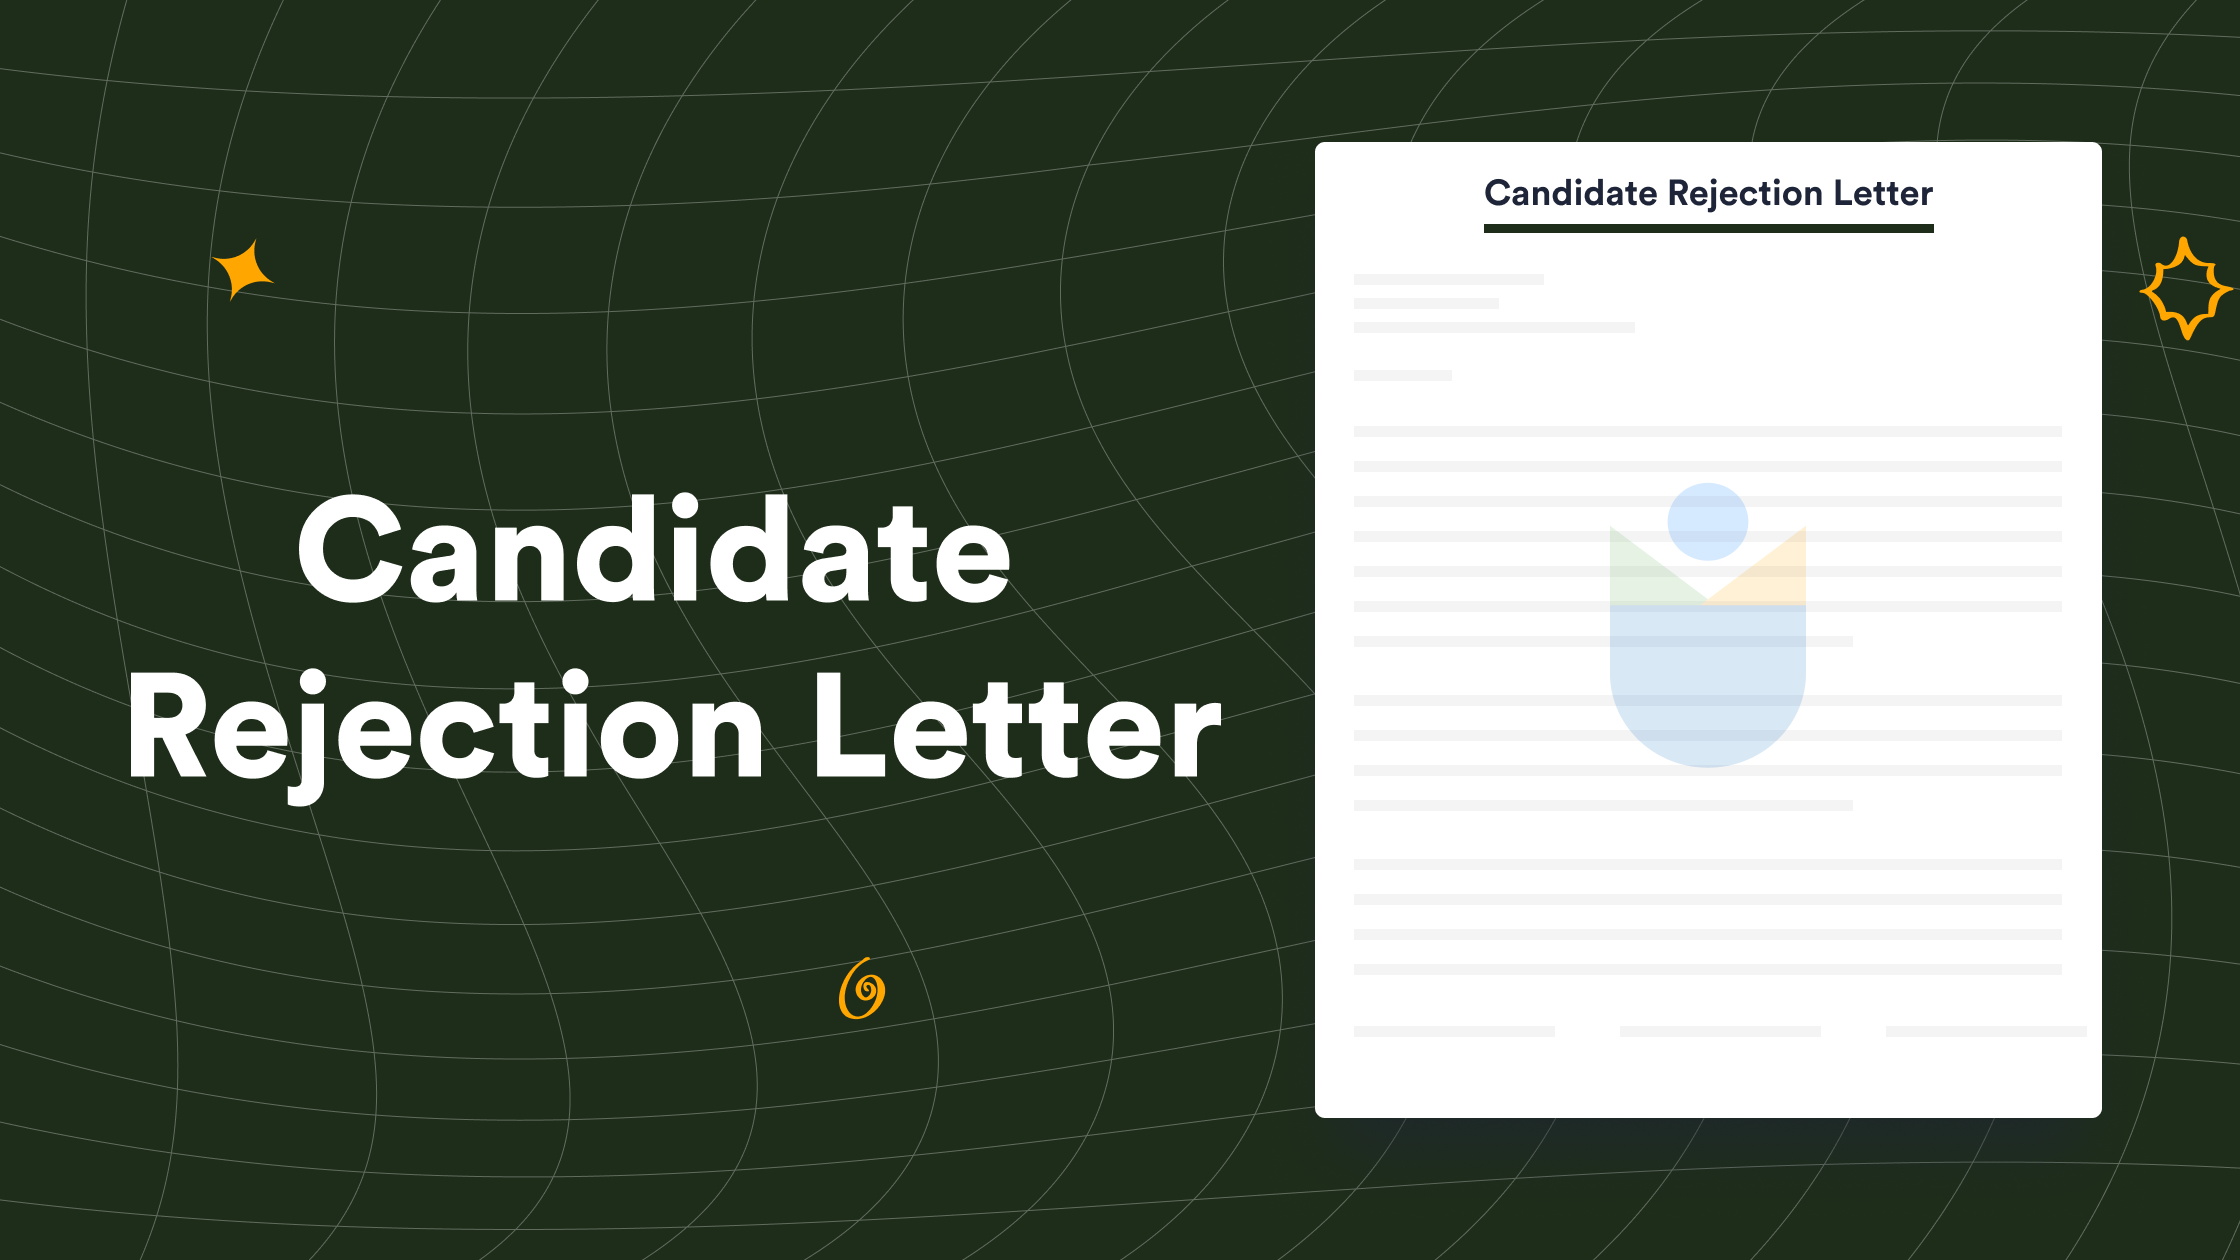 Candidate Rejection Letter